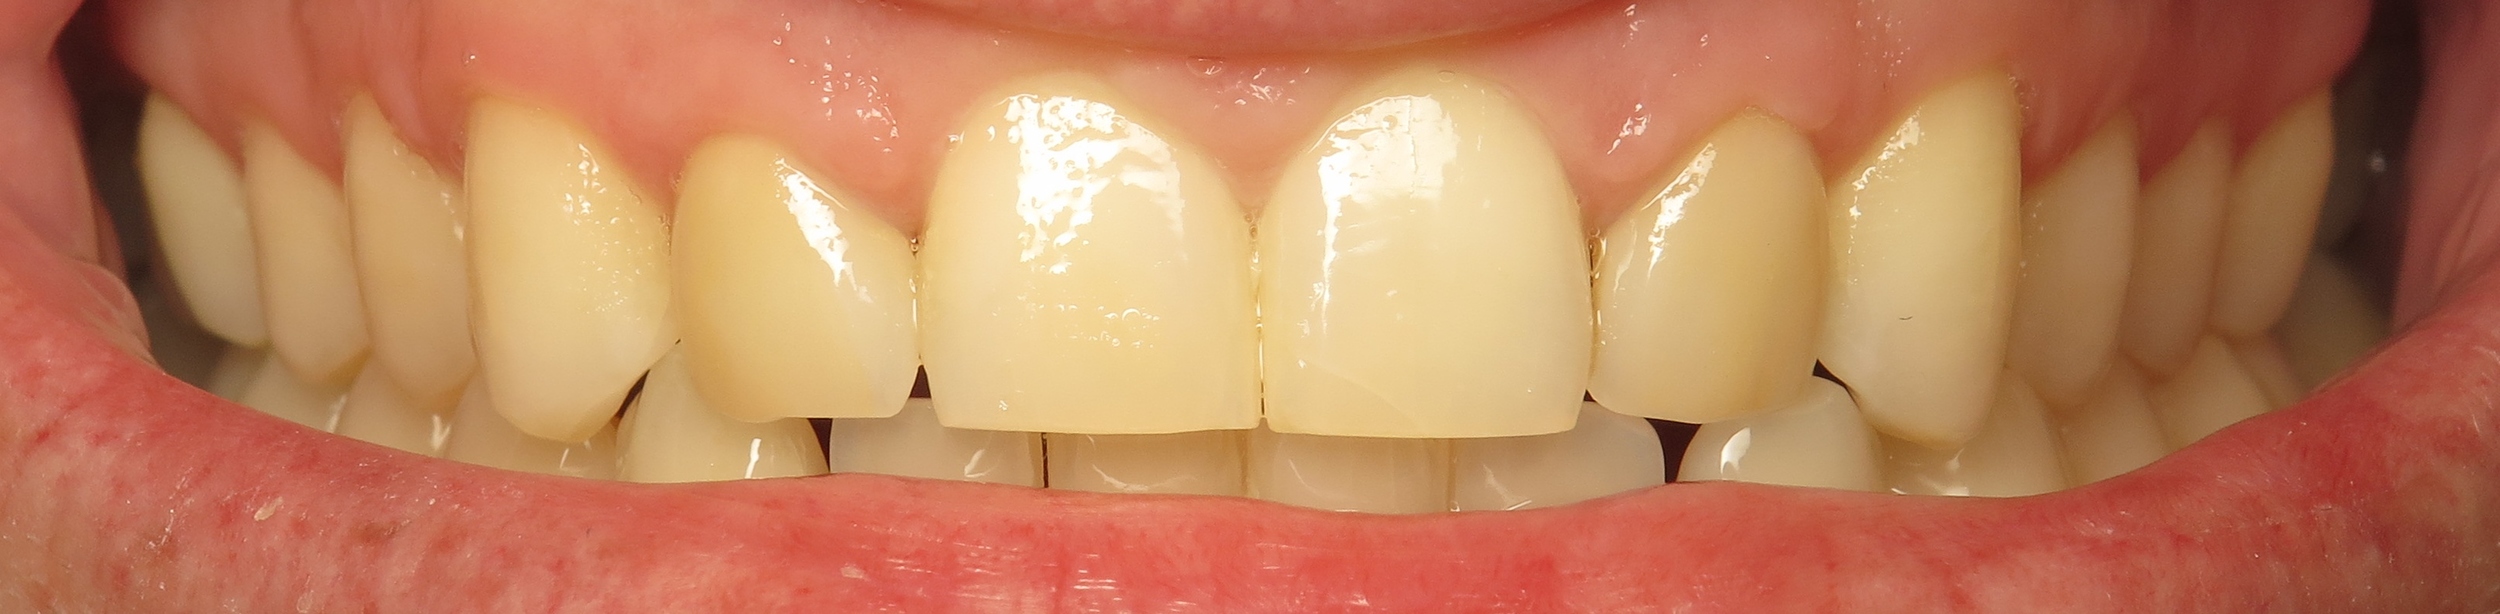 Thousand Oaks Family Dentistry - Golden Proportion Case 2 retracted smile.JPG